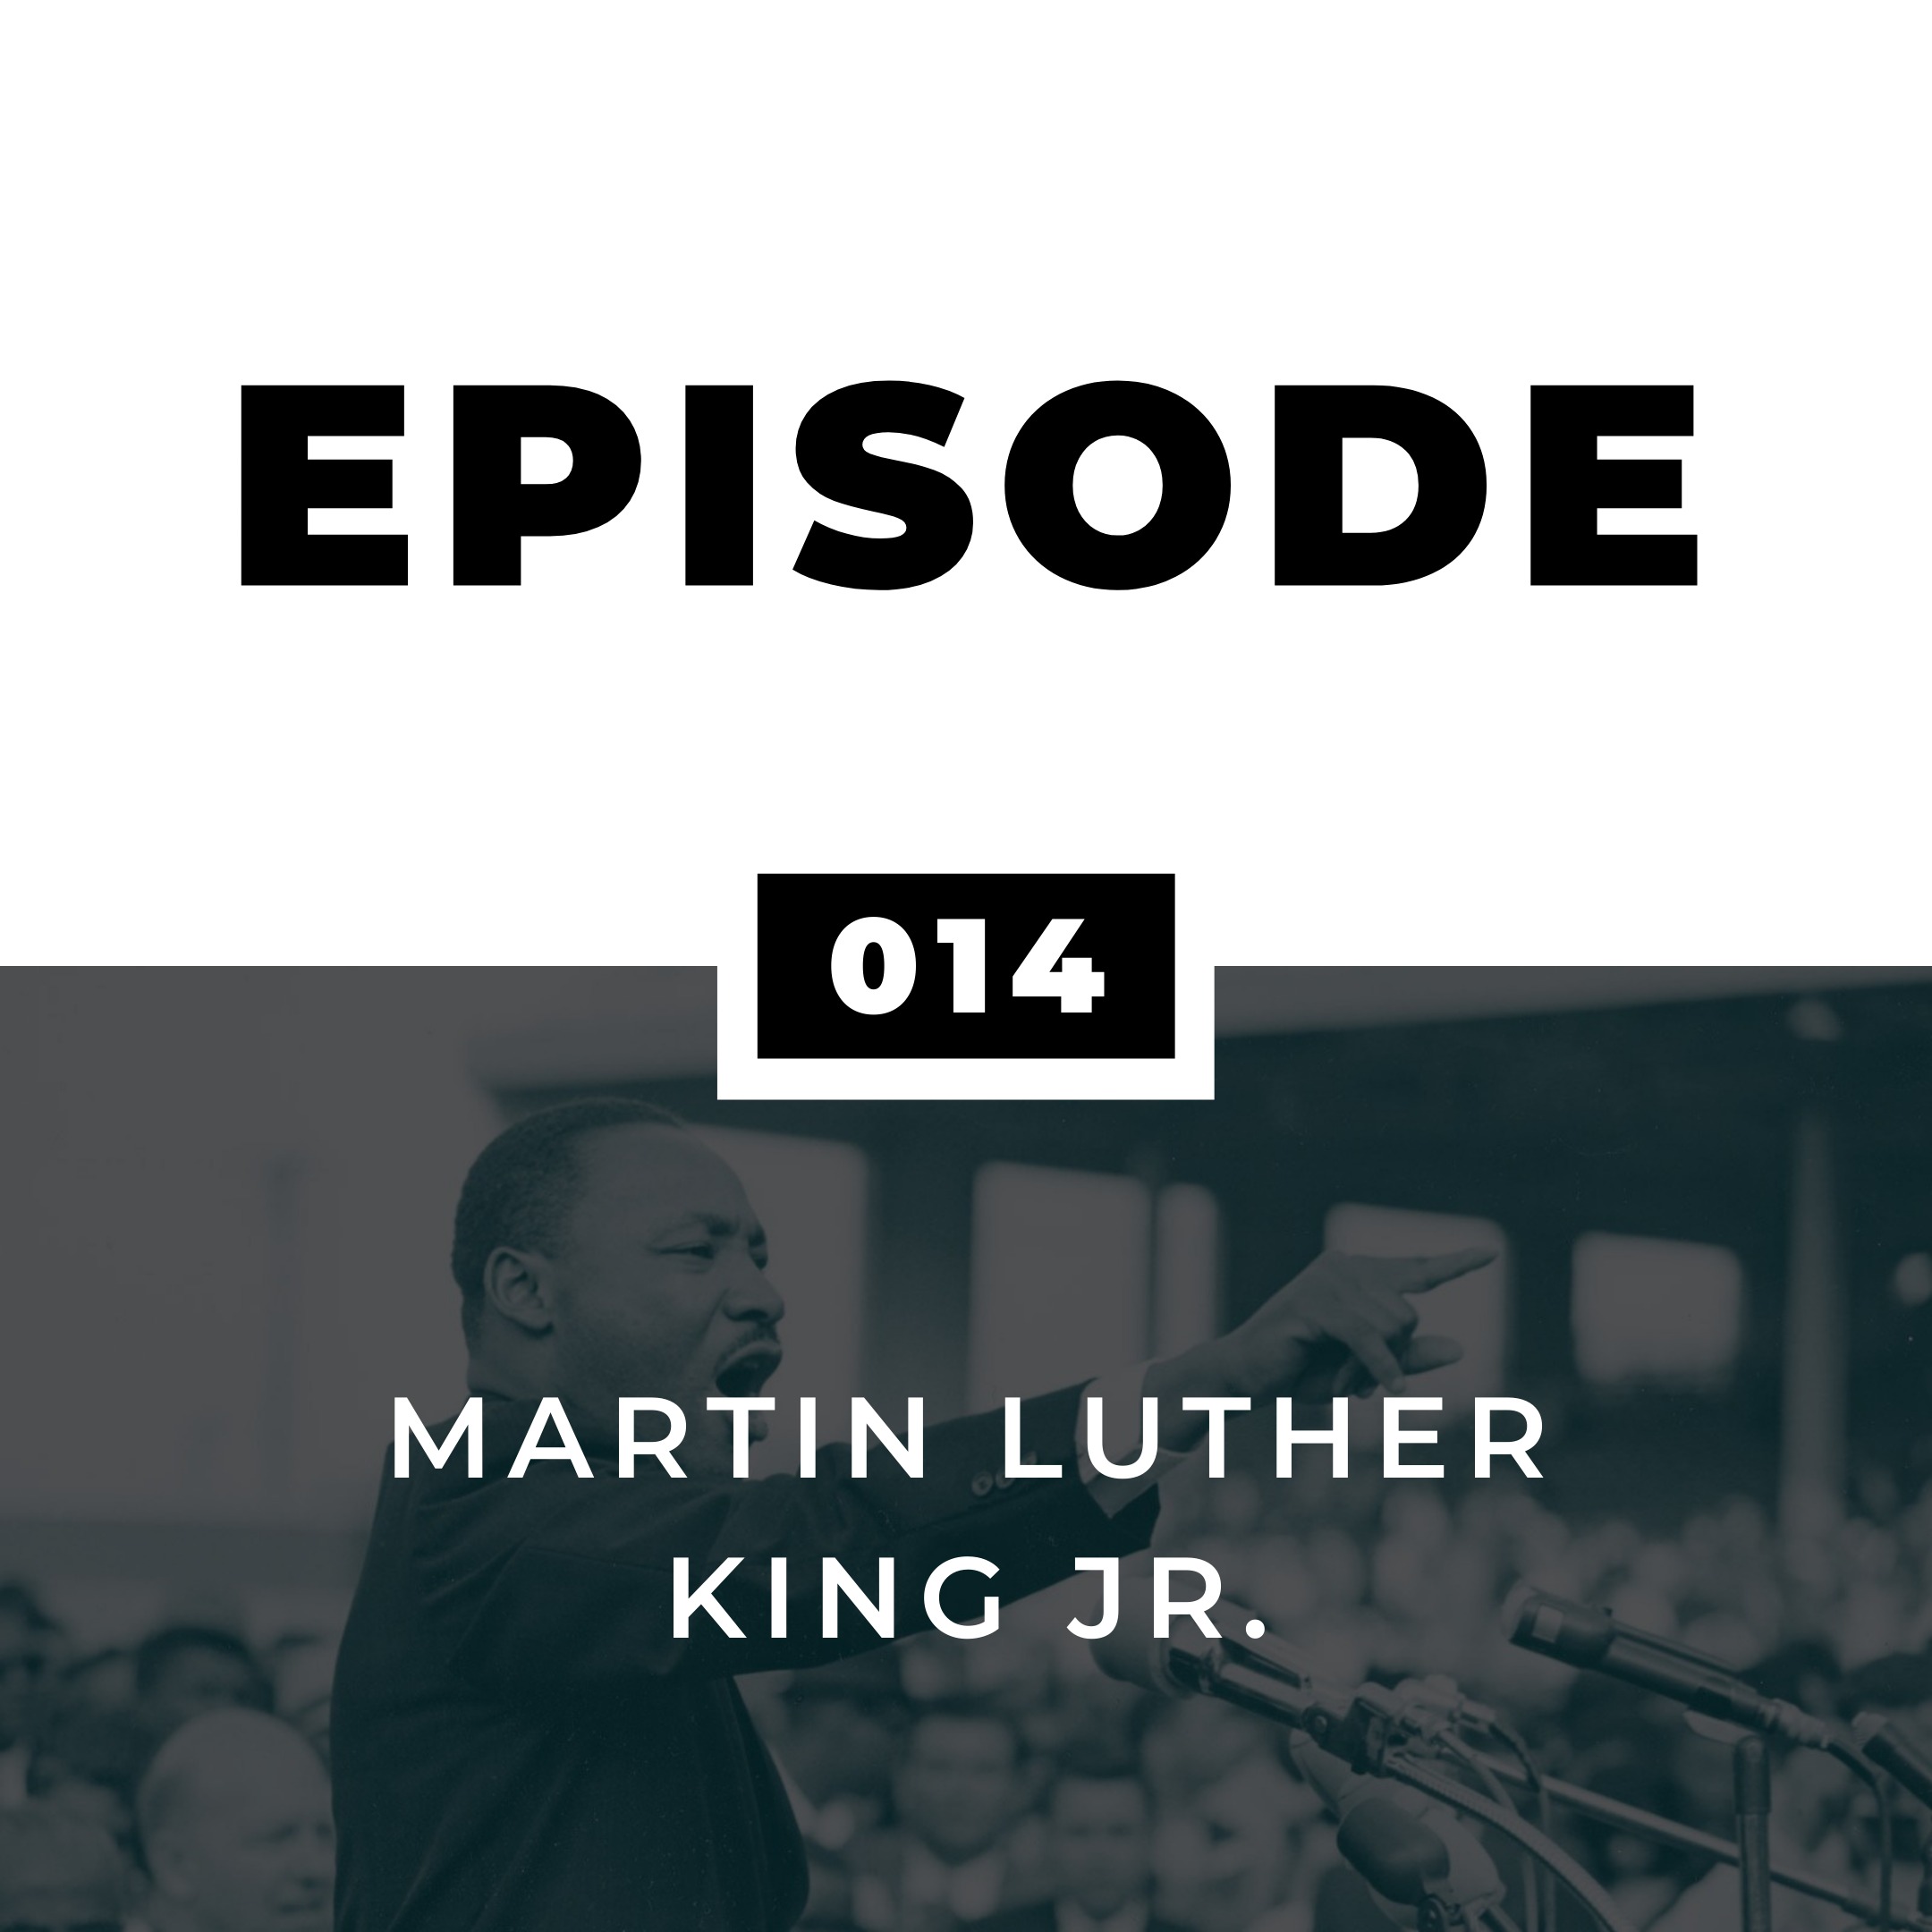 Martin Luther King Jr. - Part 2